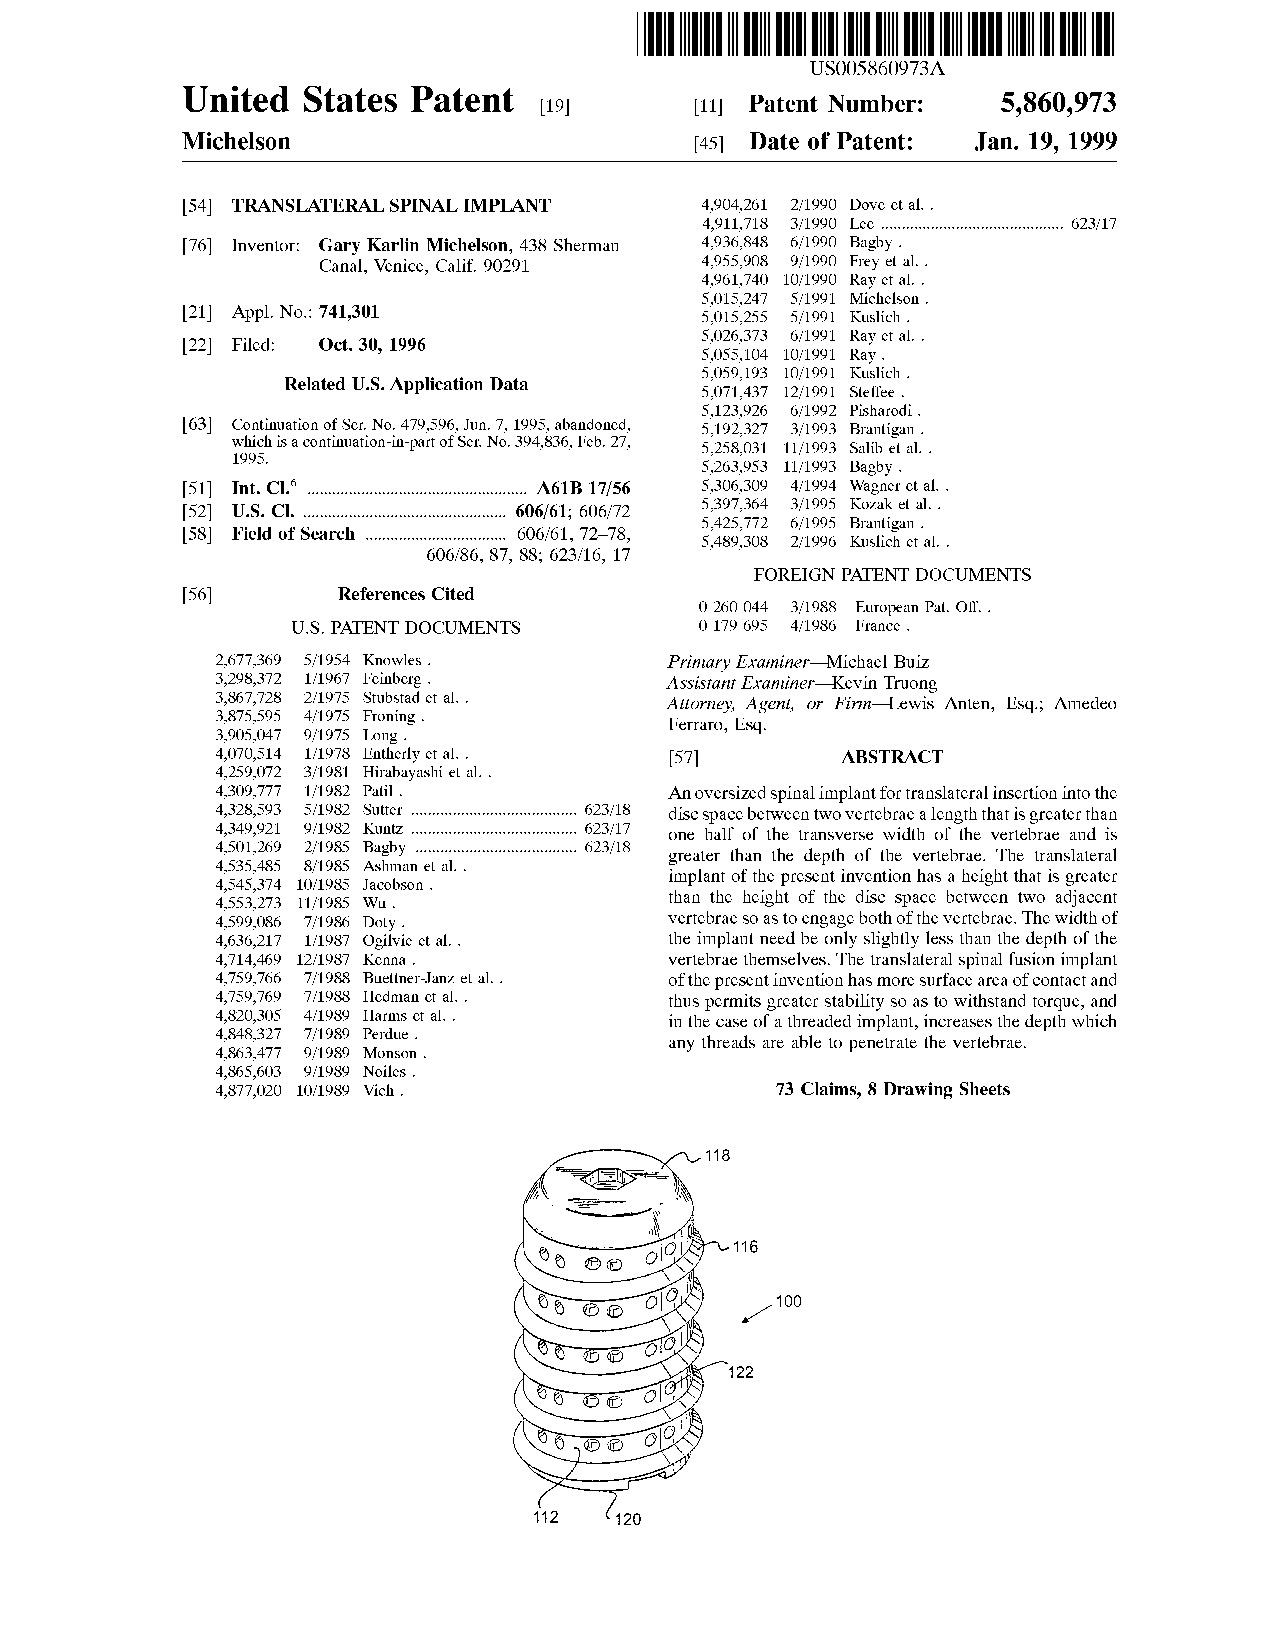 Translateral spinal implant - Patent 5,860,973